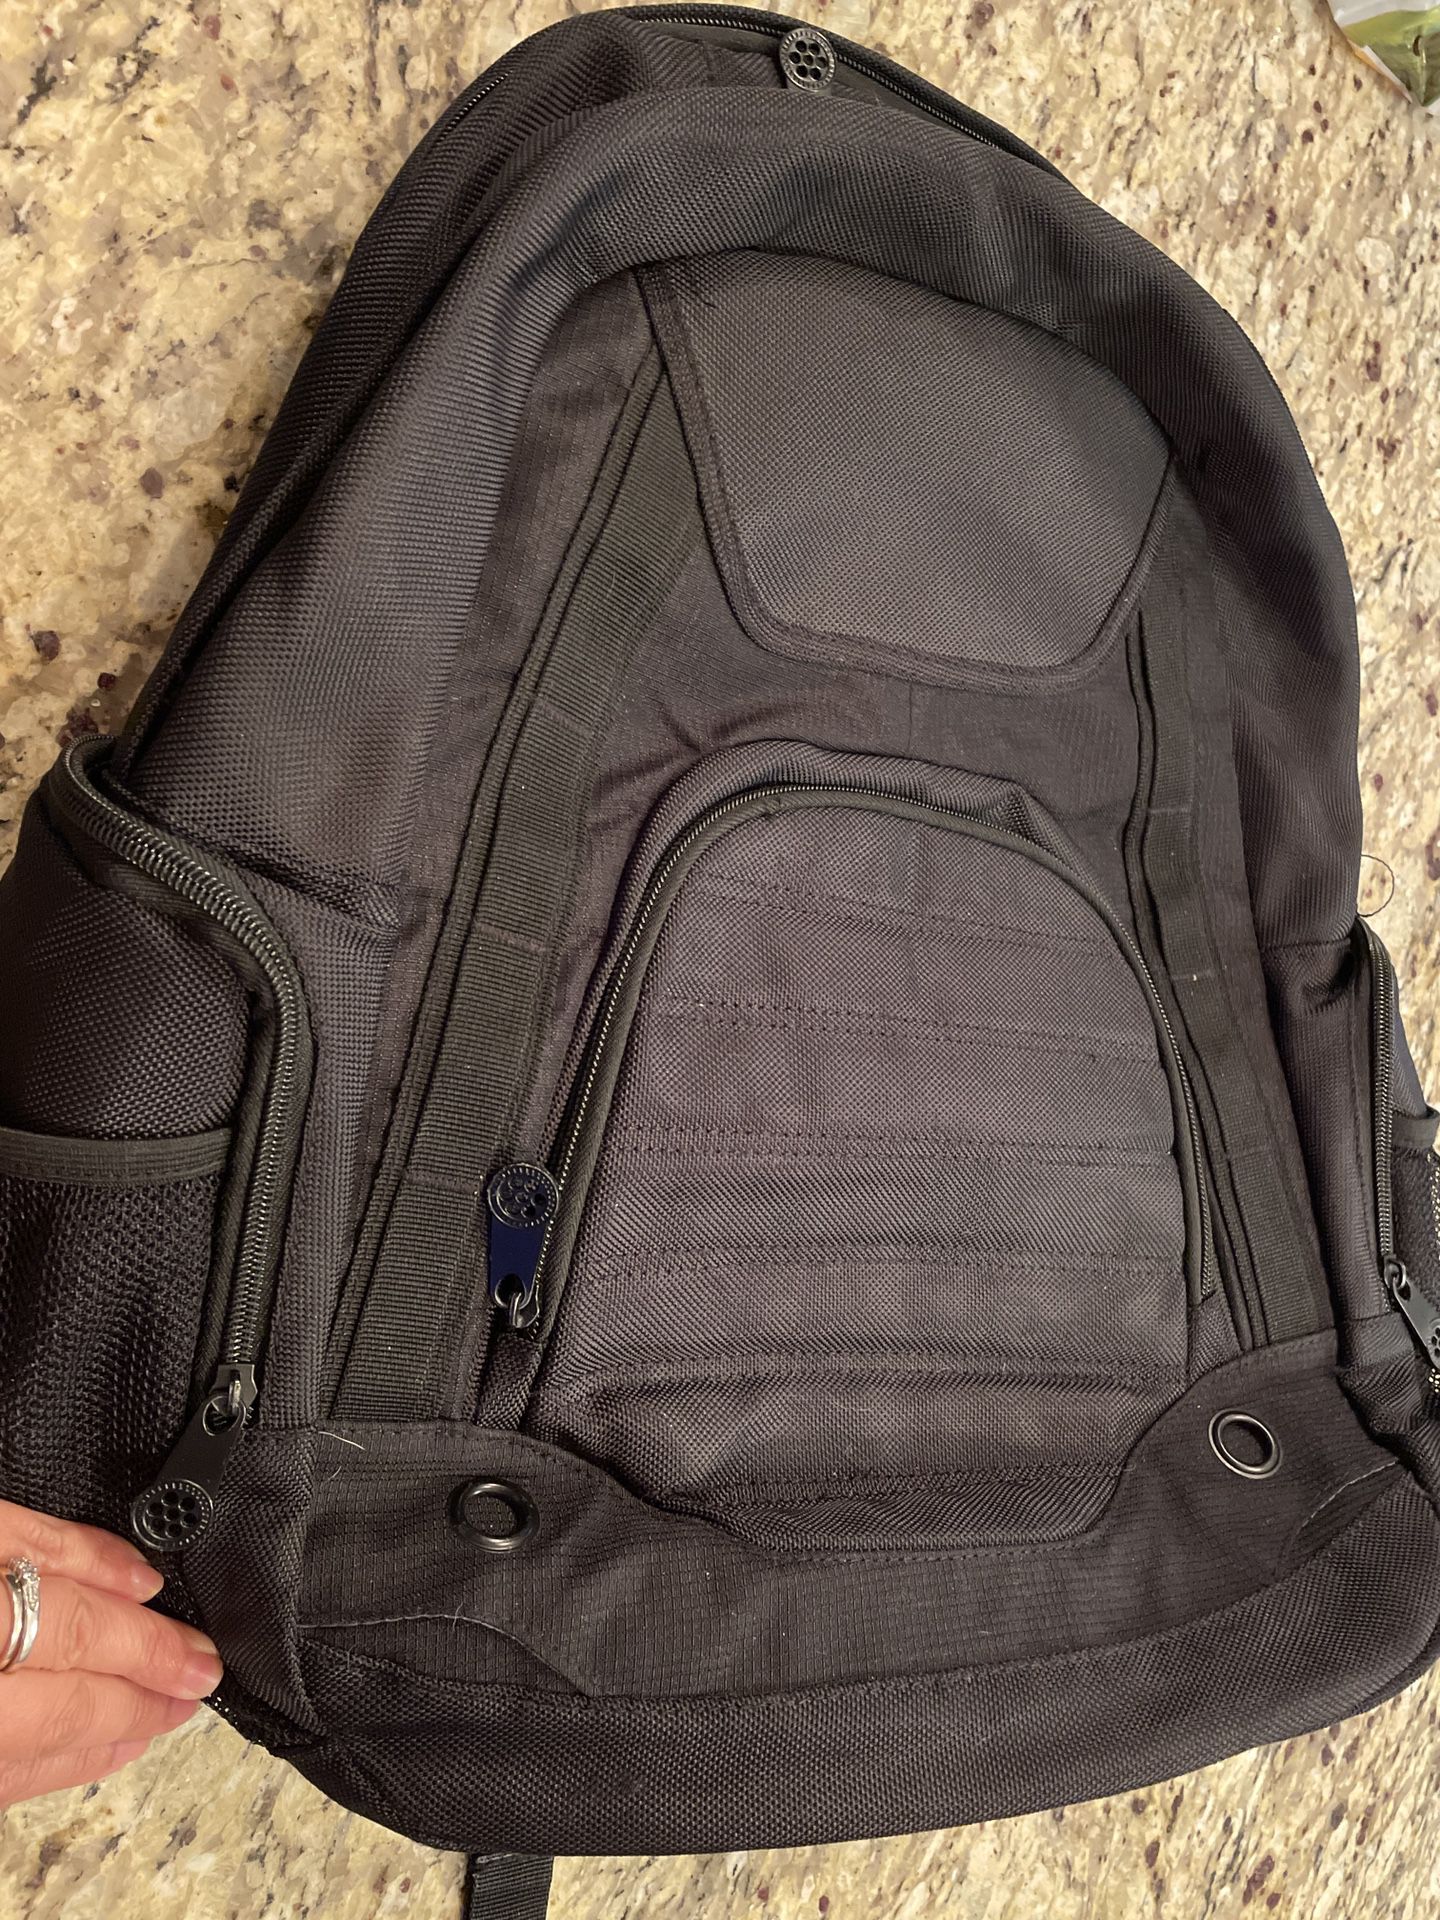 Backpack with tons of compartments $15